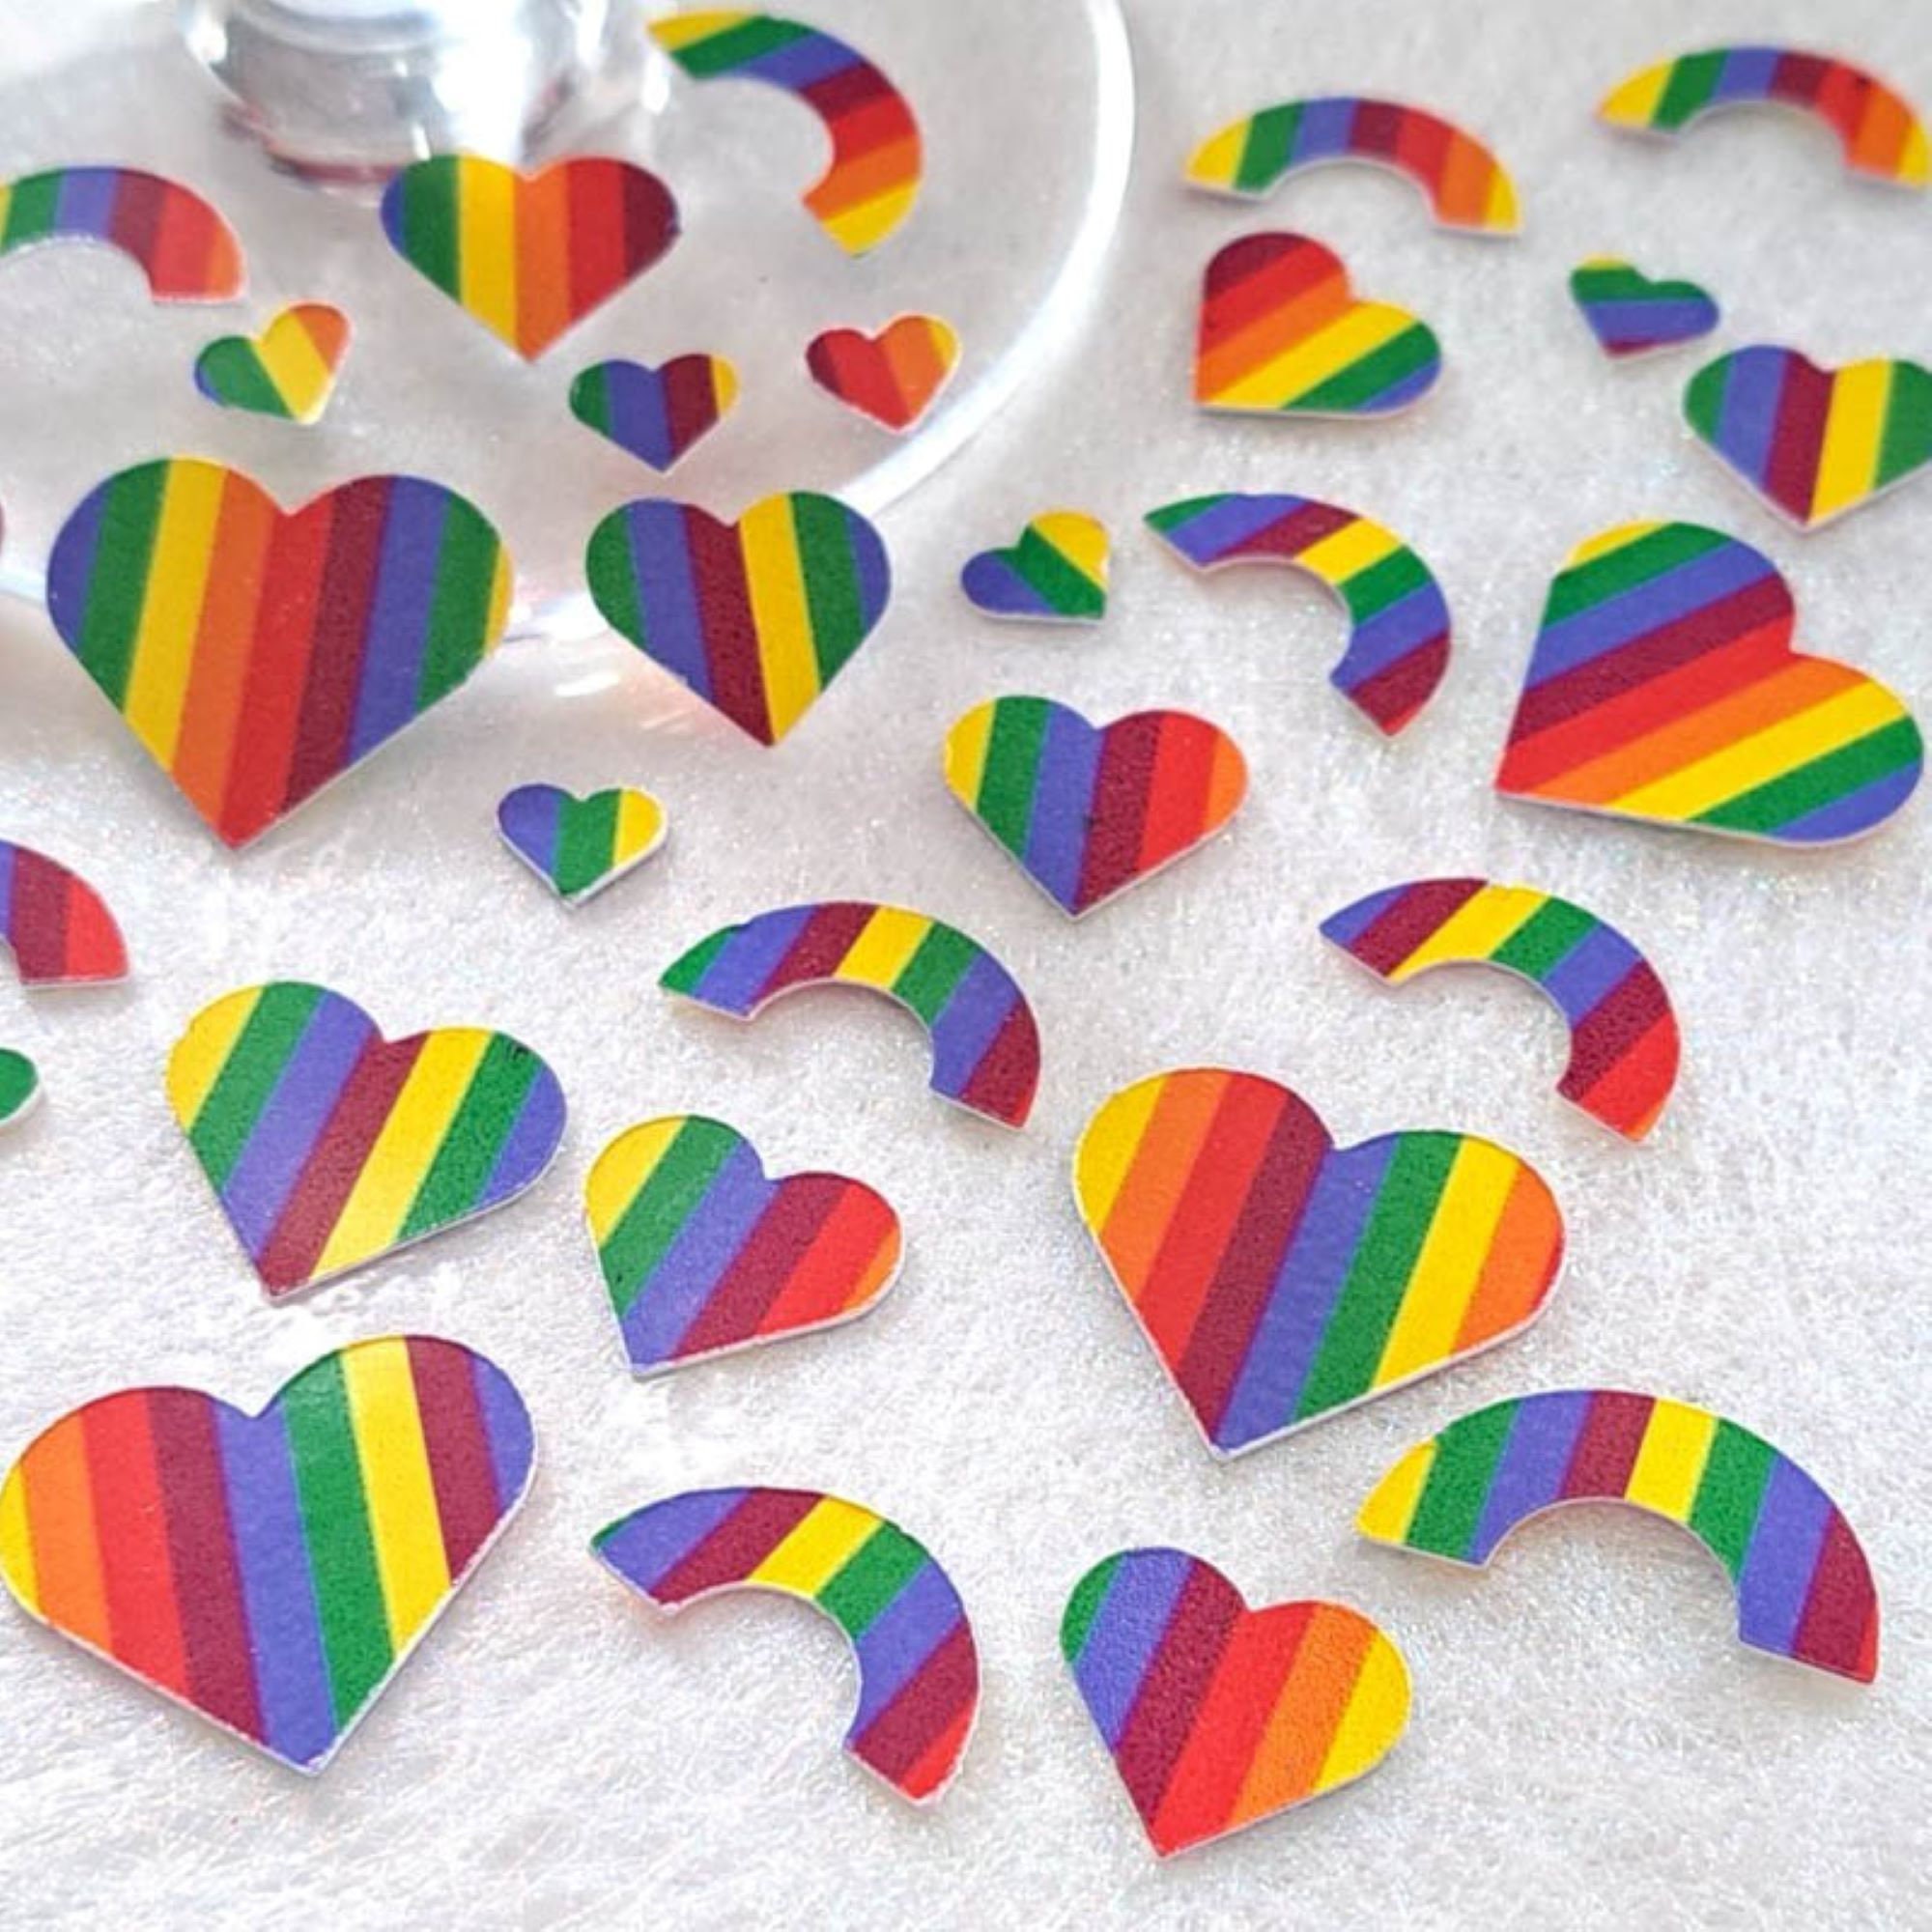 Biodegradable Wedding Confetti Rainbow Eco Friendly Tissue Paper Hearts  Kids Party Table Decoration for Balloons 5 TO 100 HANDFULS 